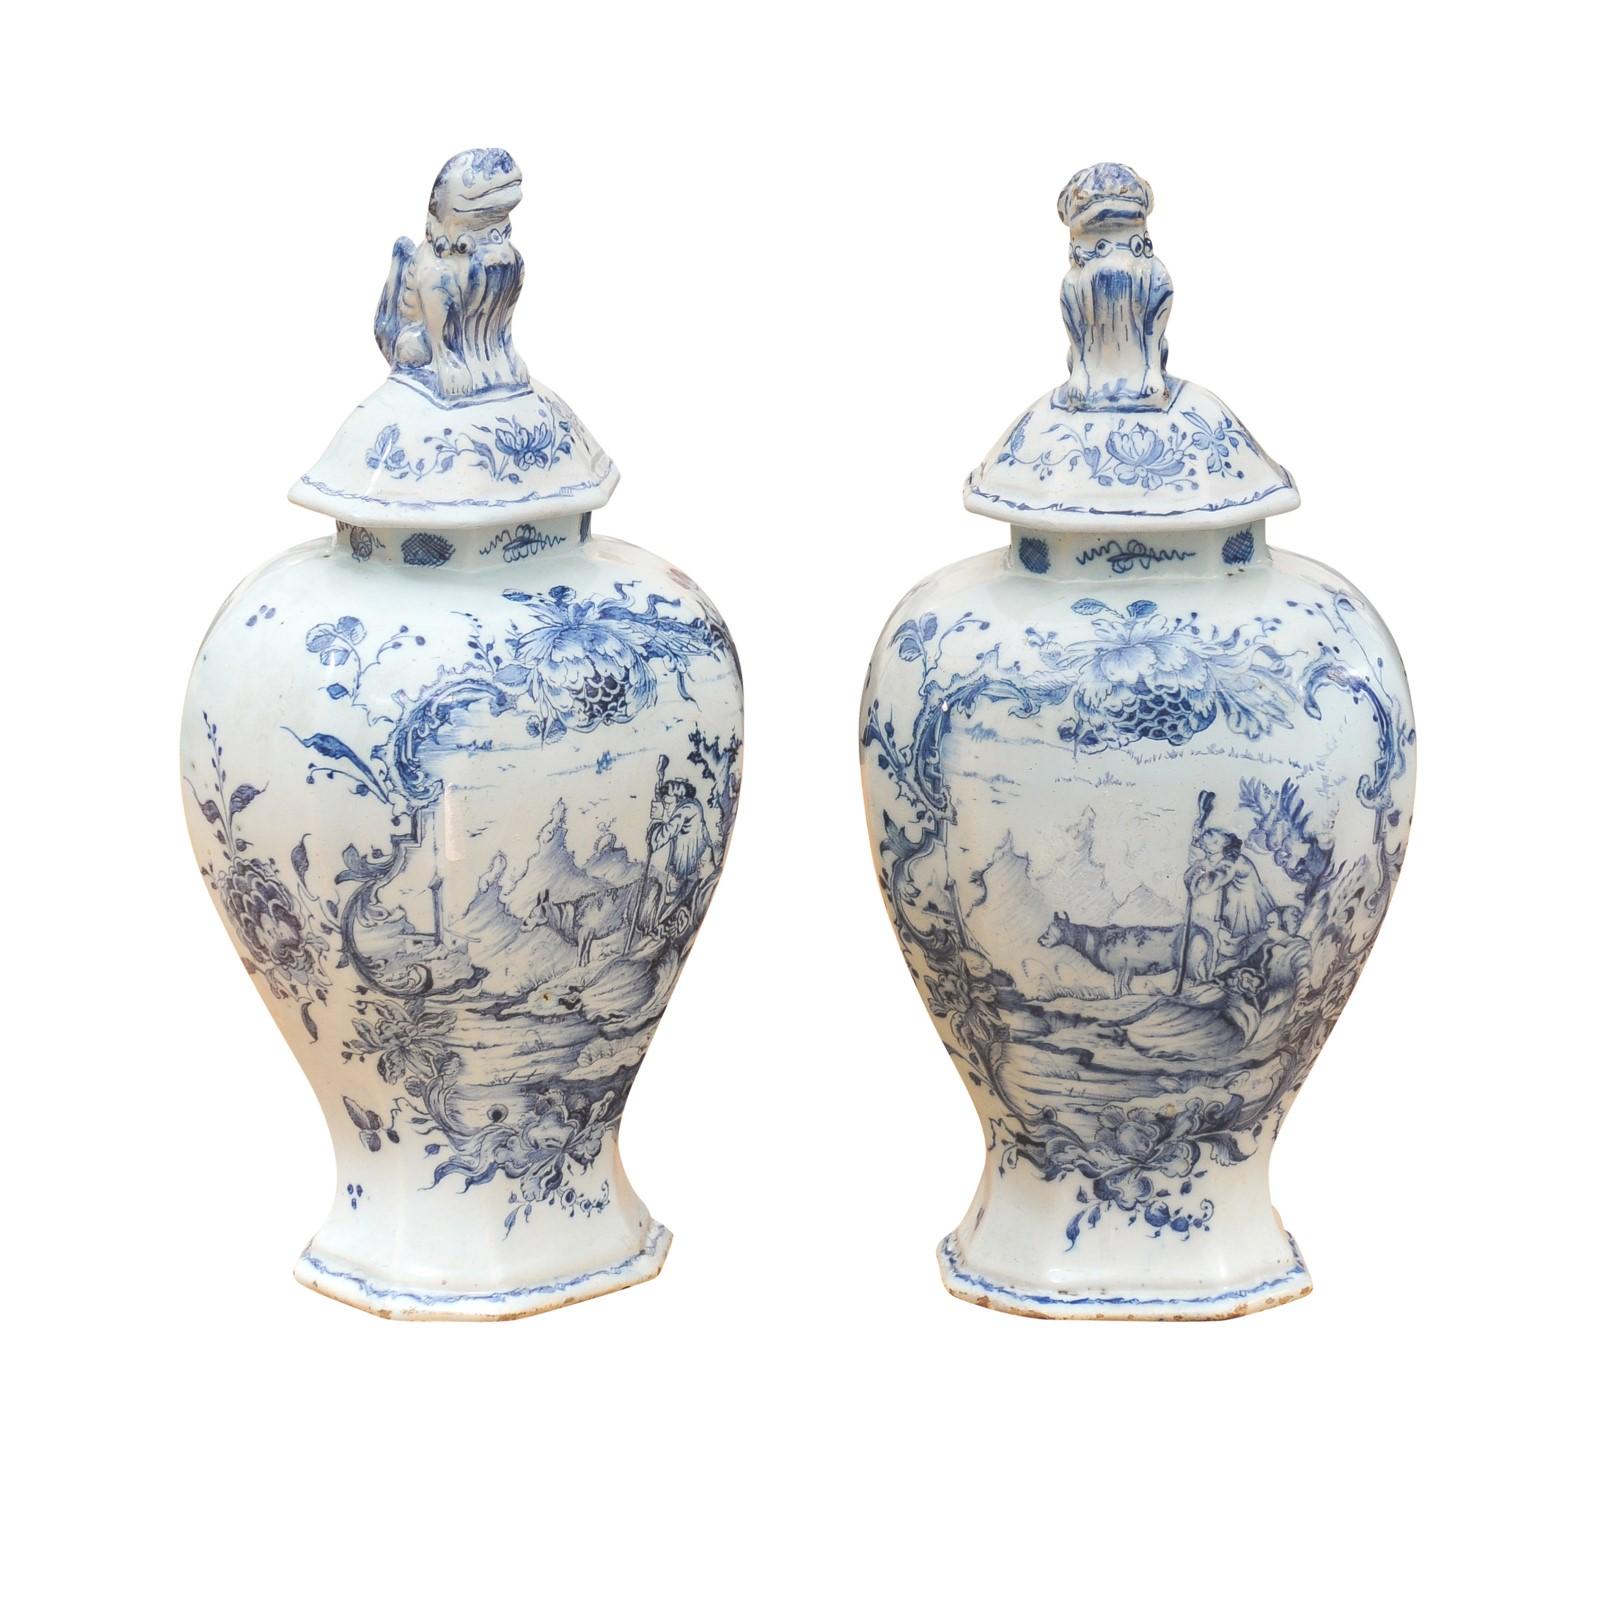 Pair of Late 18th Century Italian Porcelain Garniture Urns with Lids In Good Condition For Sale In Atlanta, GA